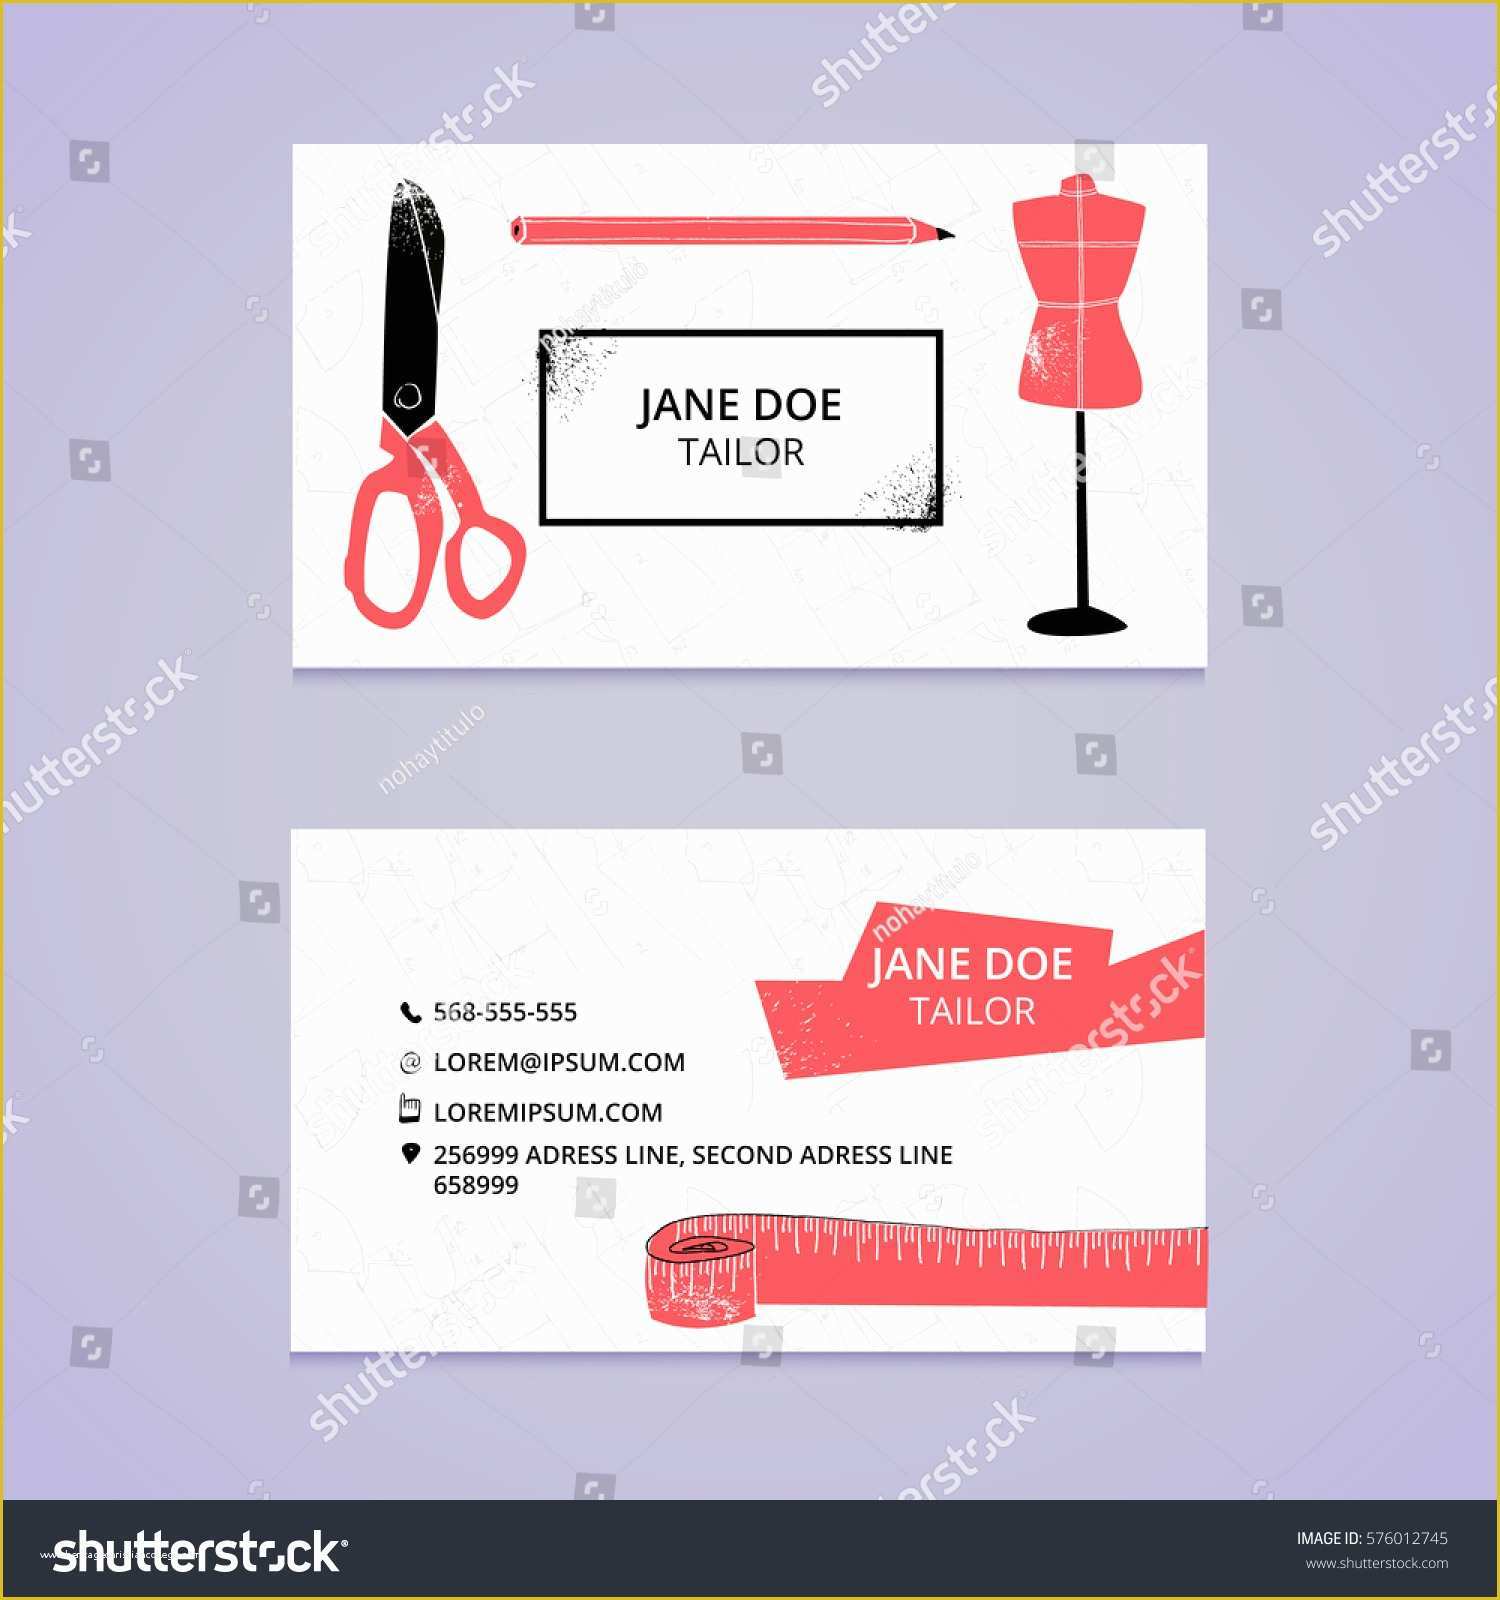 Tailoring Business Card Templates Free Of Tailoring Services Business Card Business Card Template Tailor